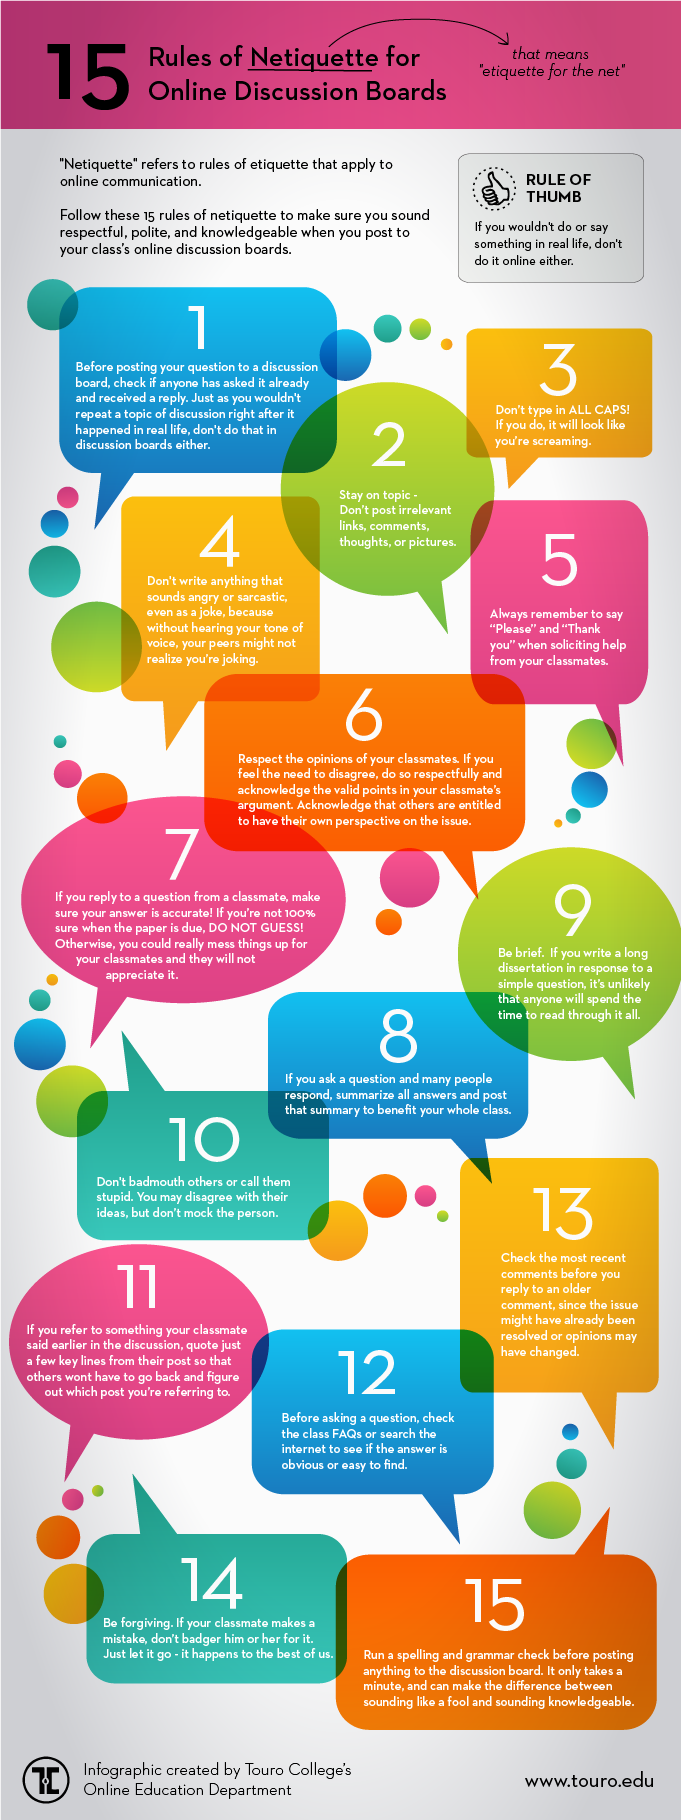 Netiquette in Online Discussion Boards infographic